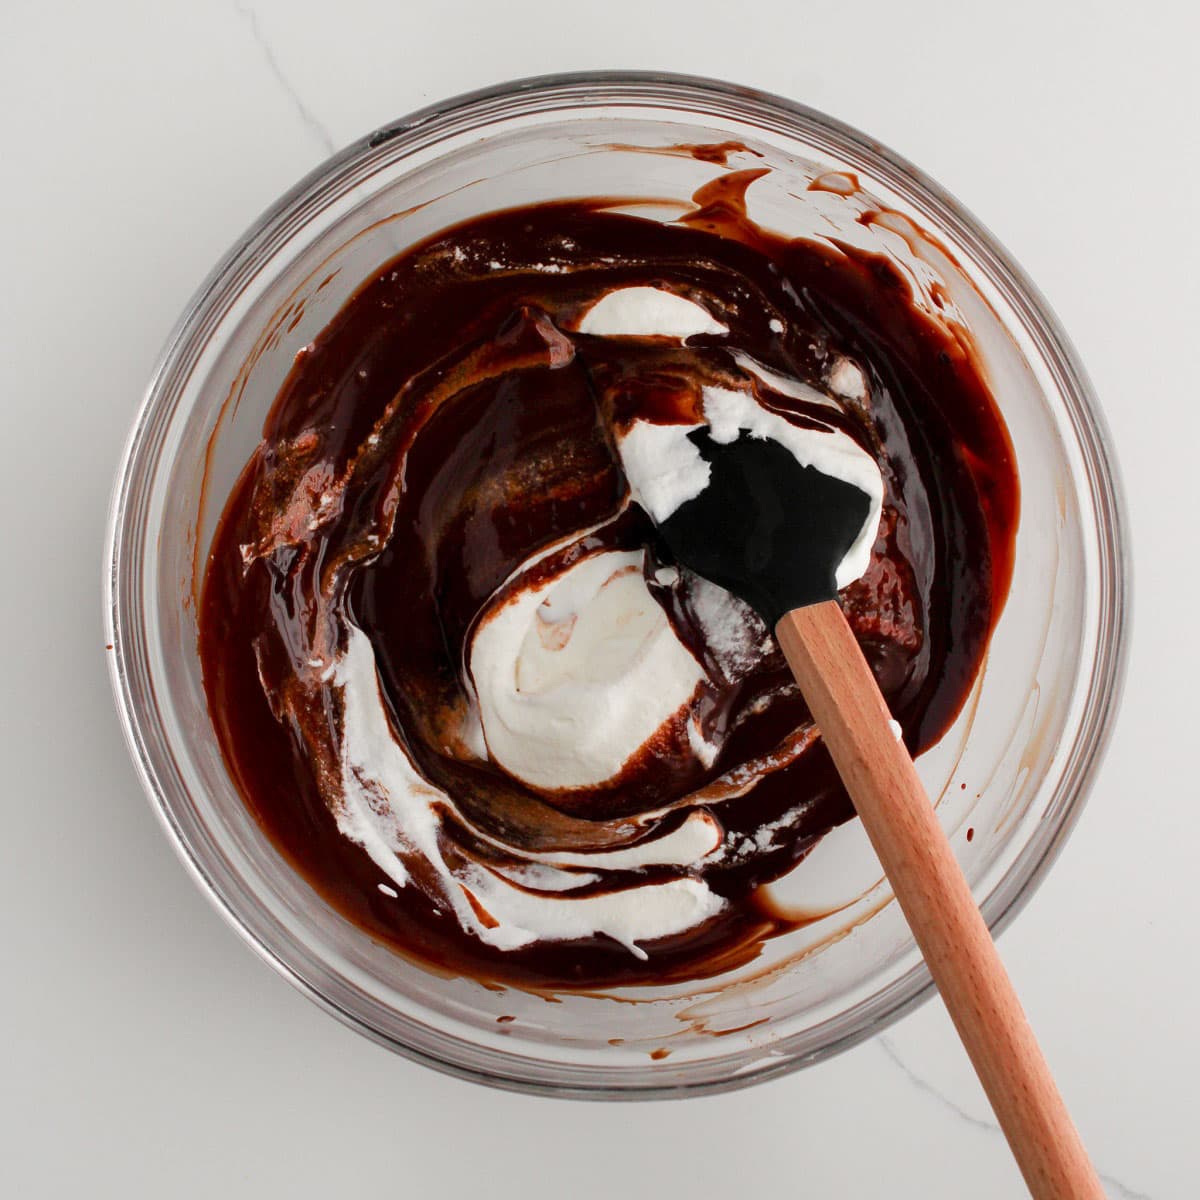 folding whipped cream into the melted chocolate